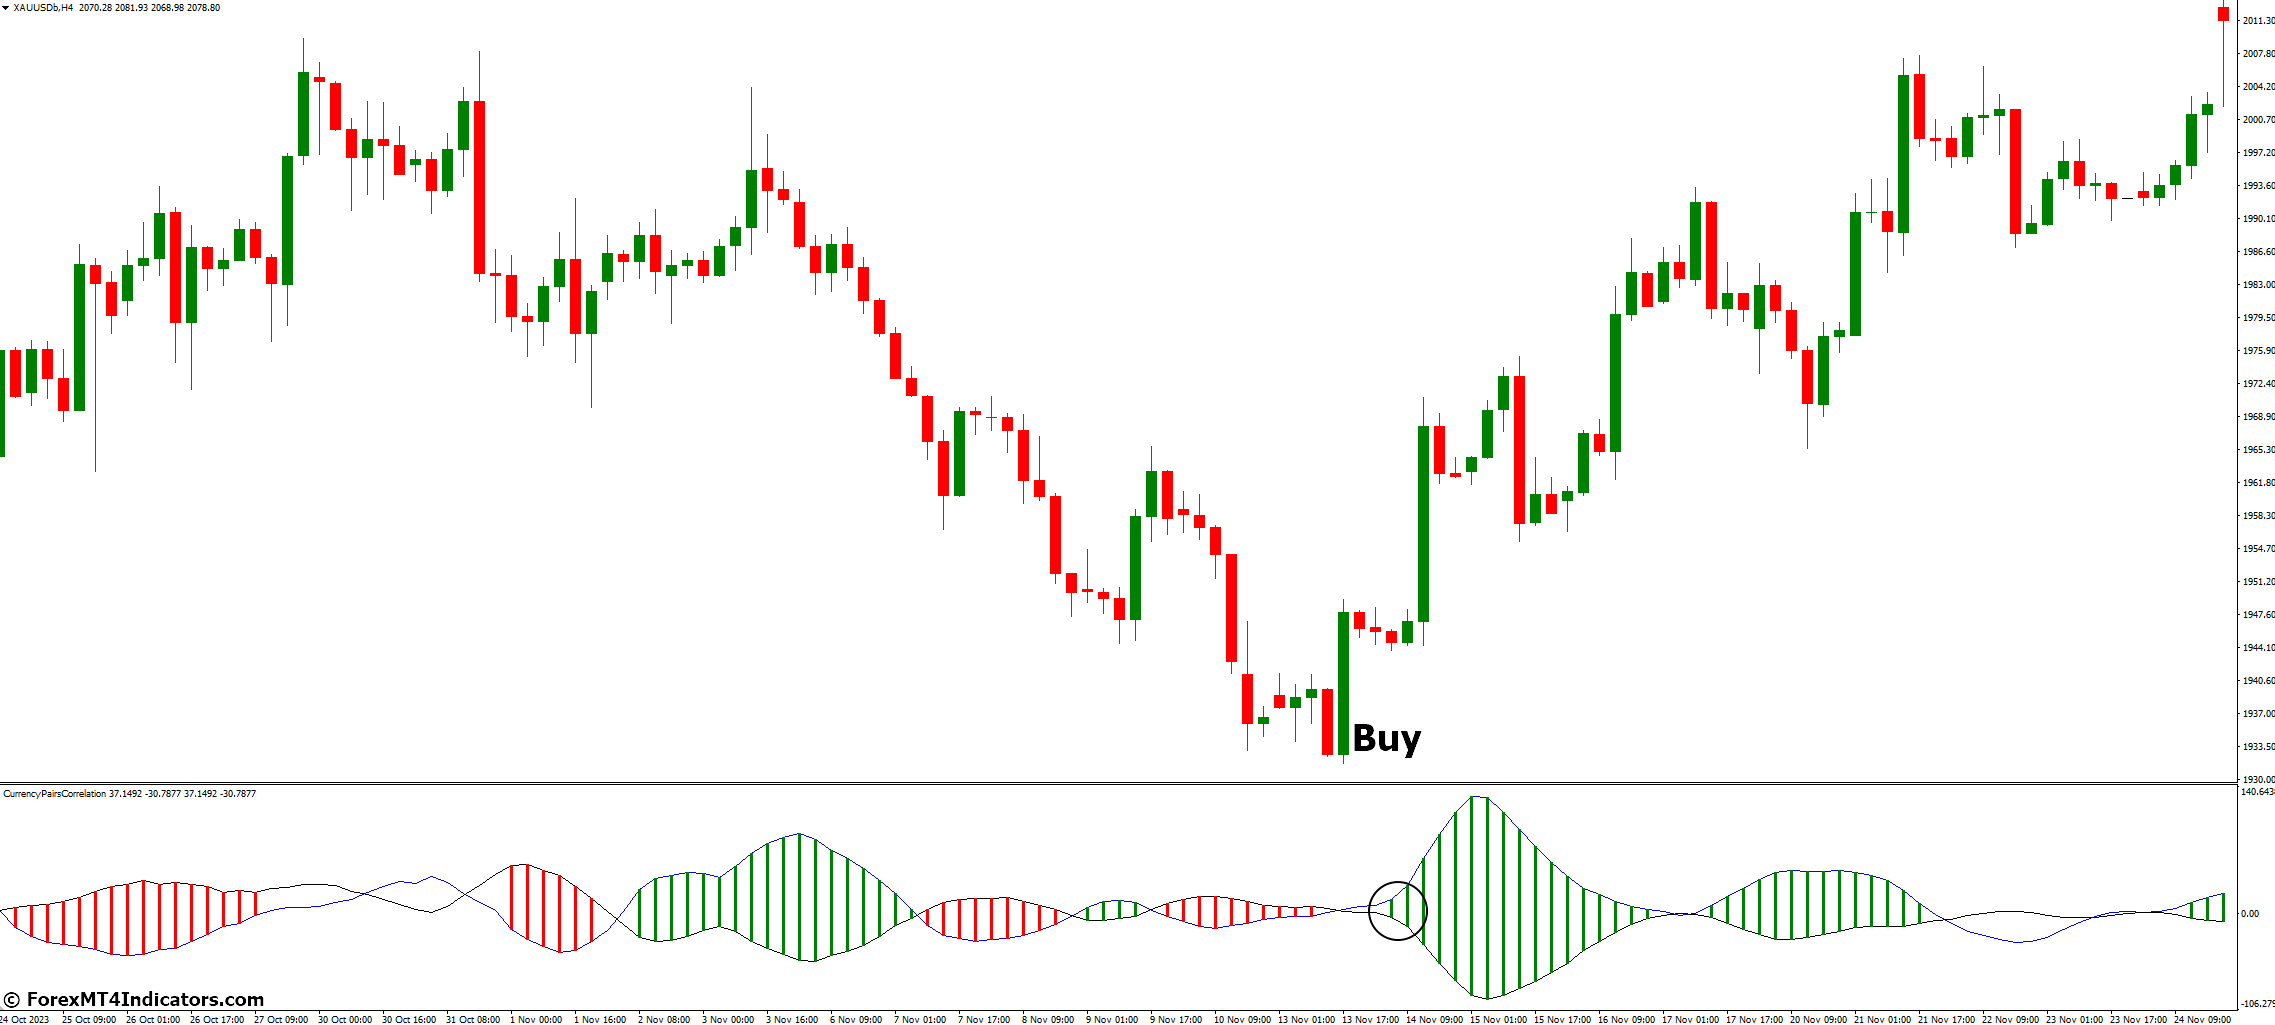 How to Trade with Currency Correlation Indicator - Buy Entry